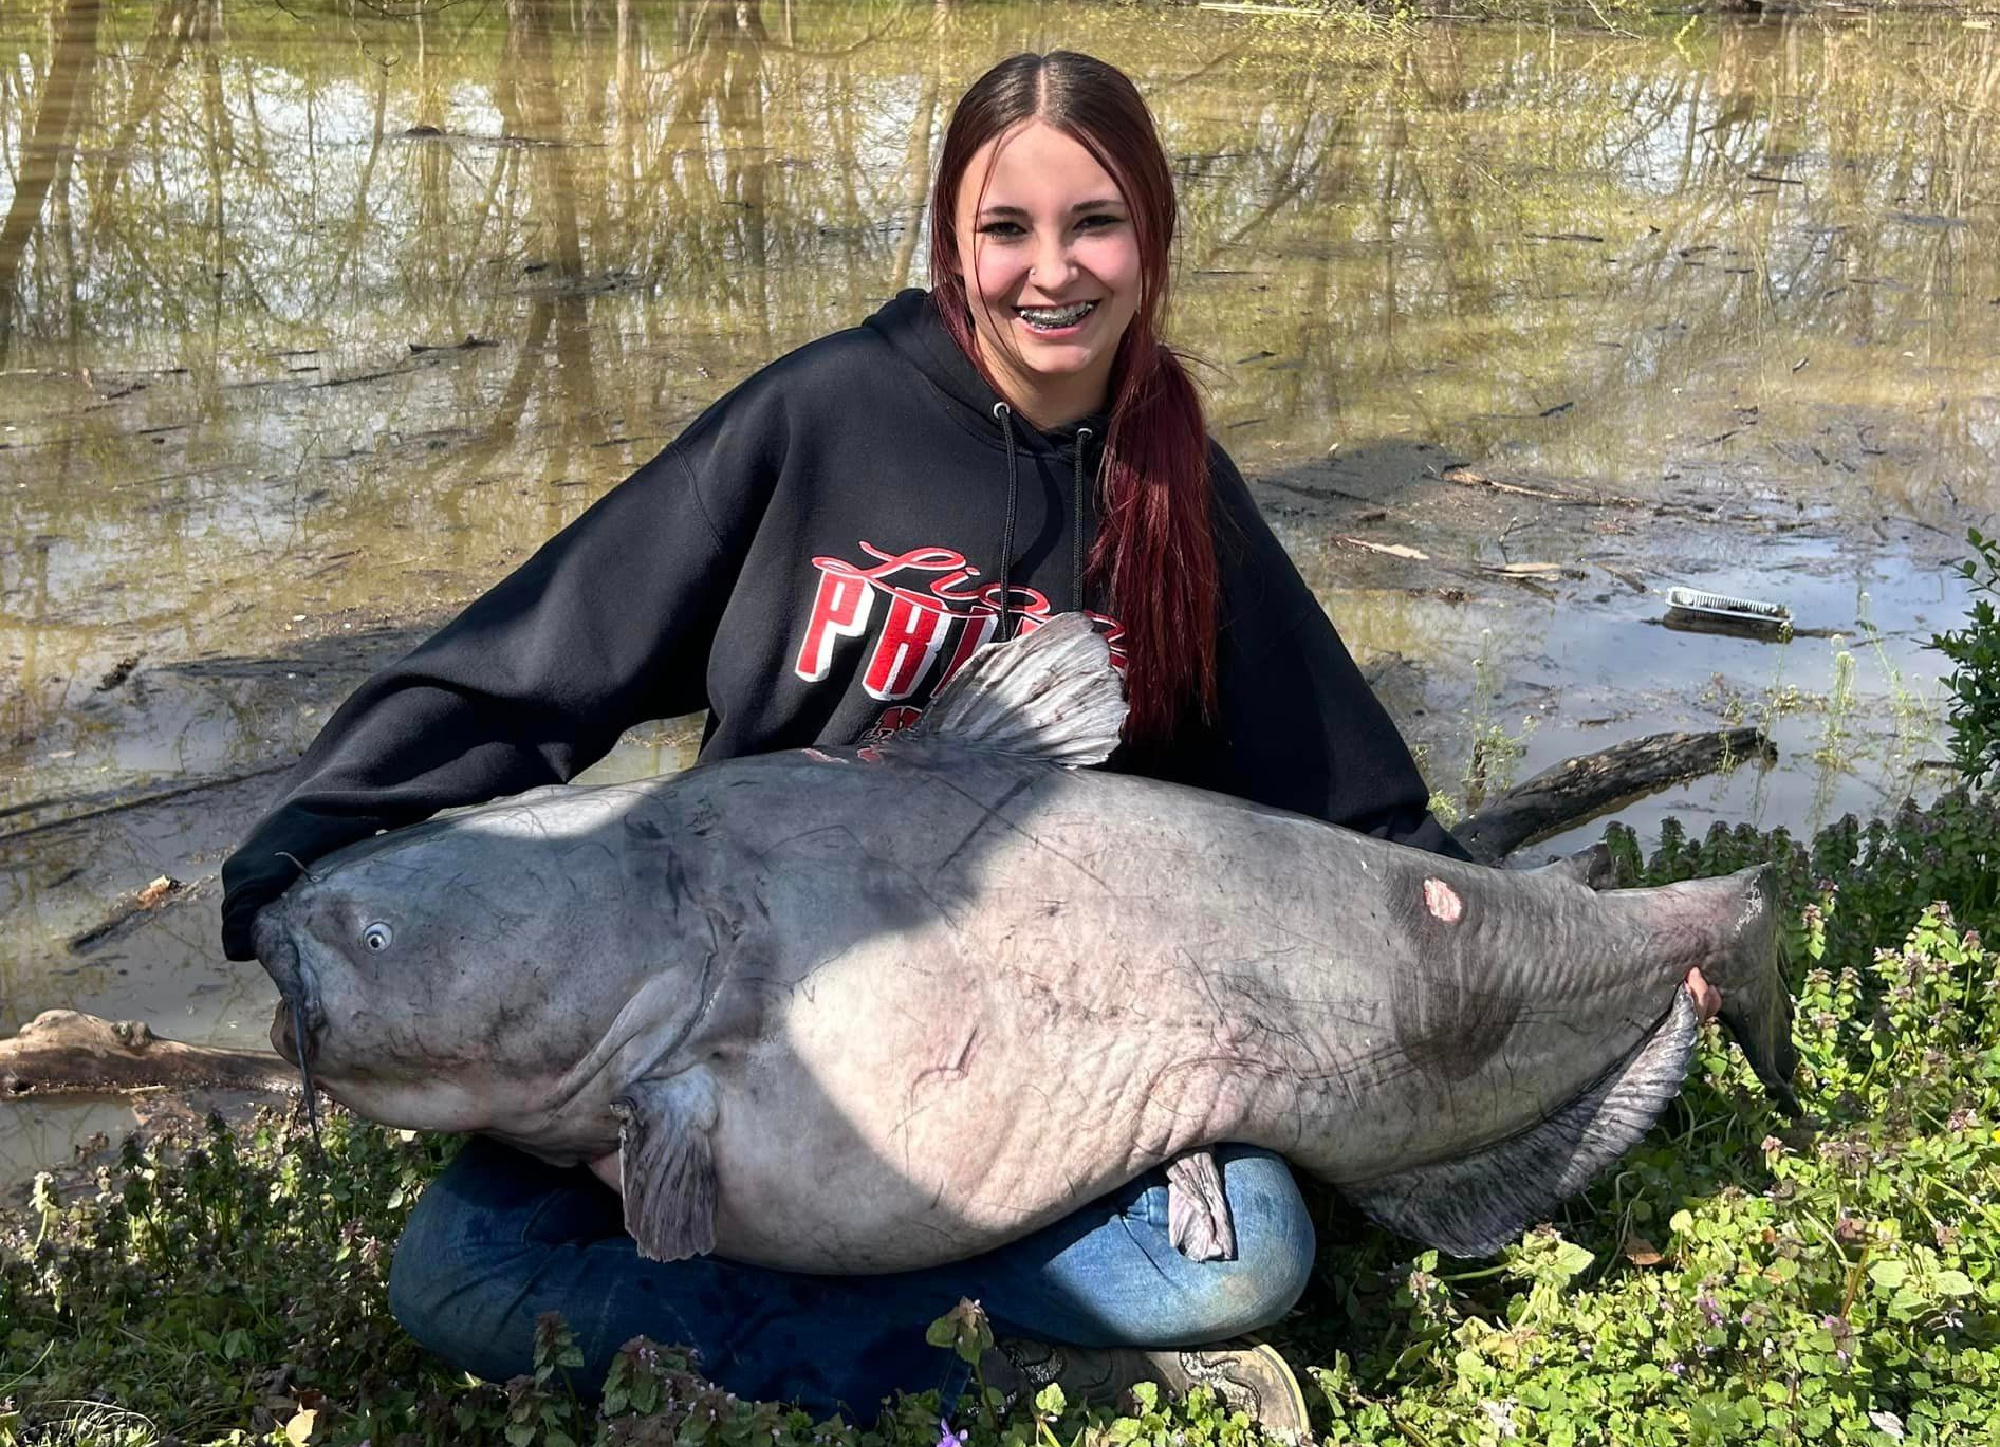 101-Pound Blue Catfish Caught on Jugline Is Officially the New Ohio Record